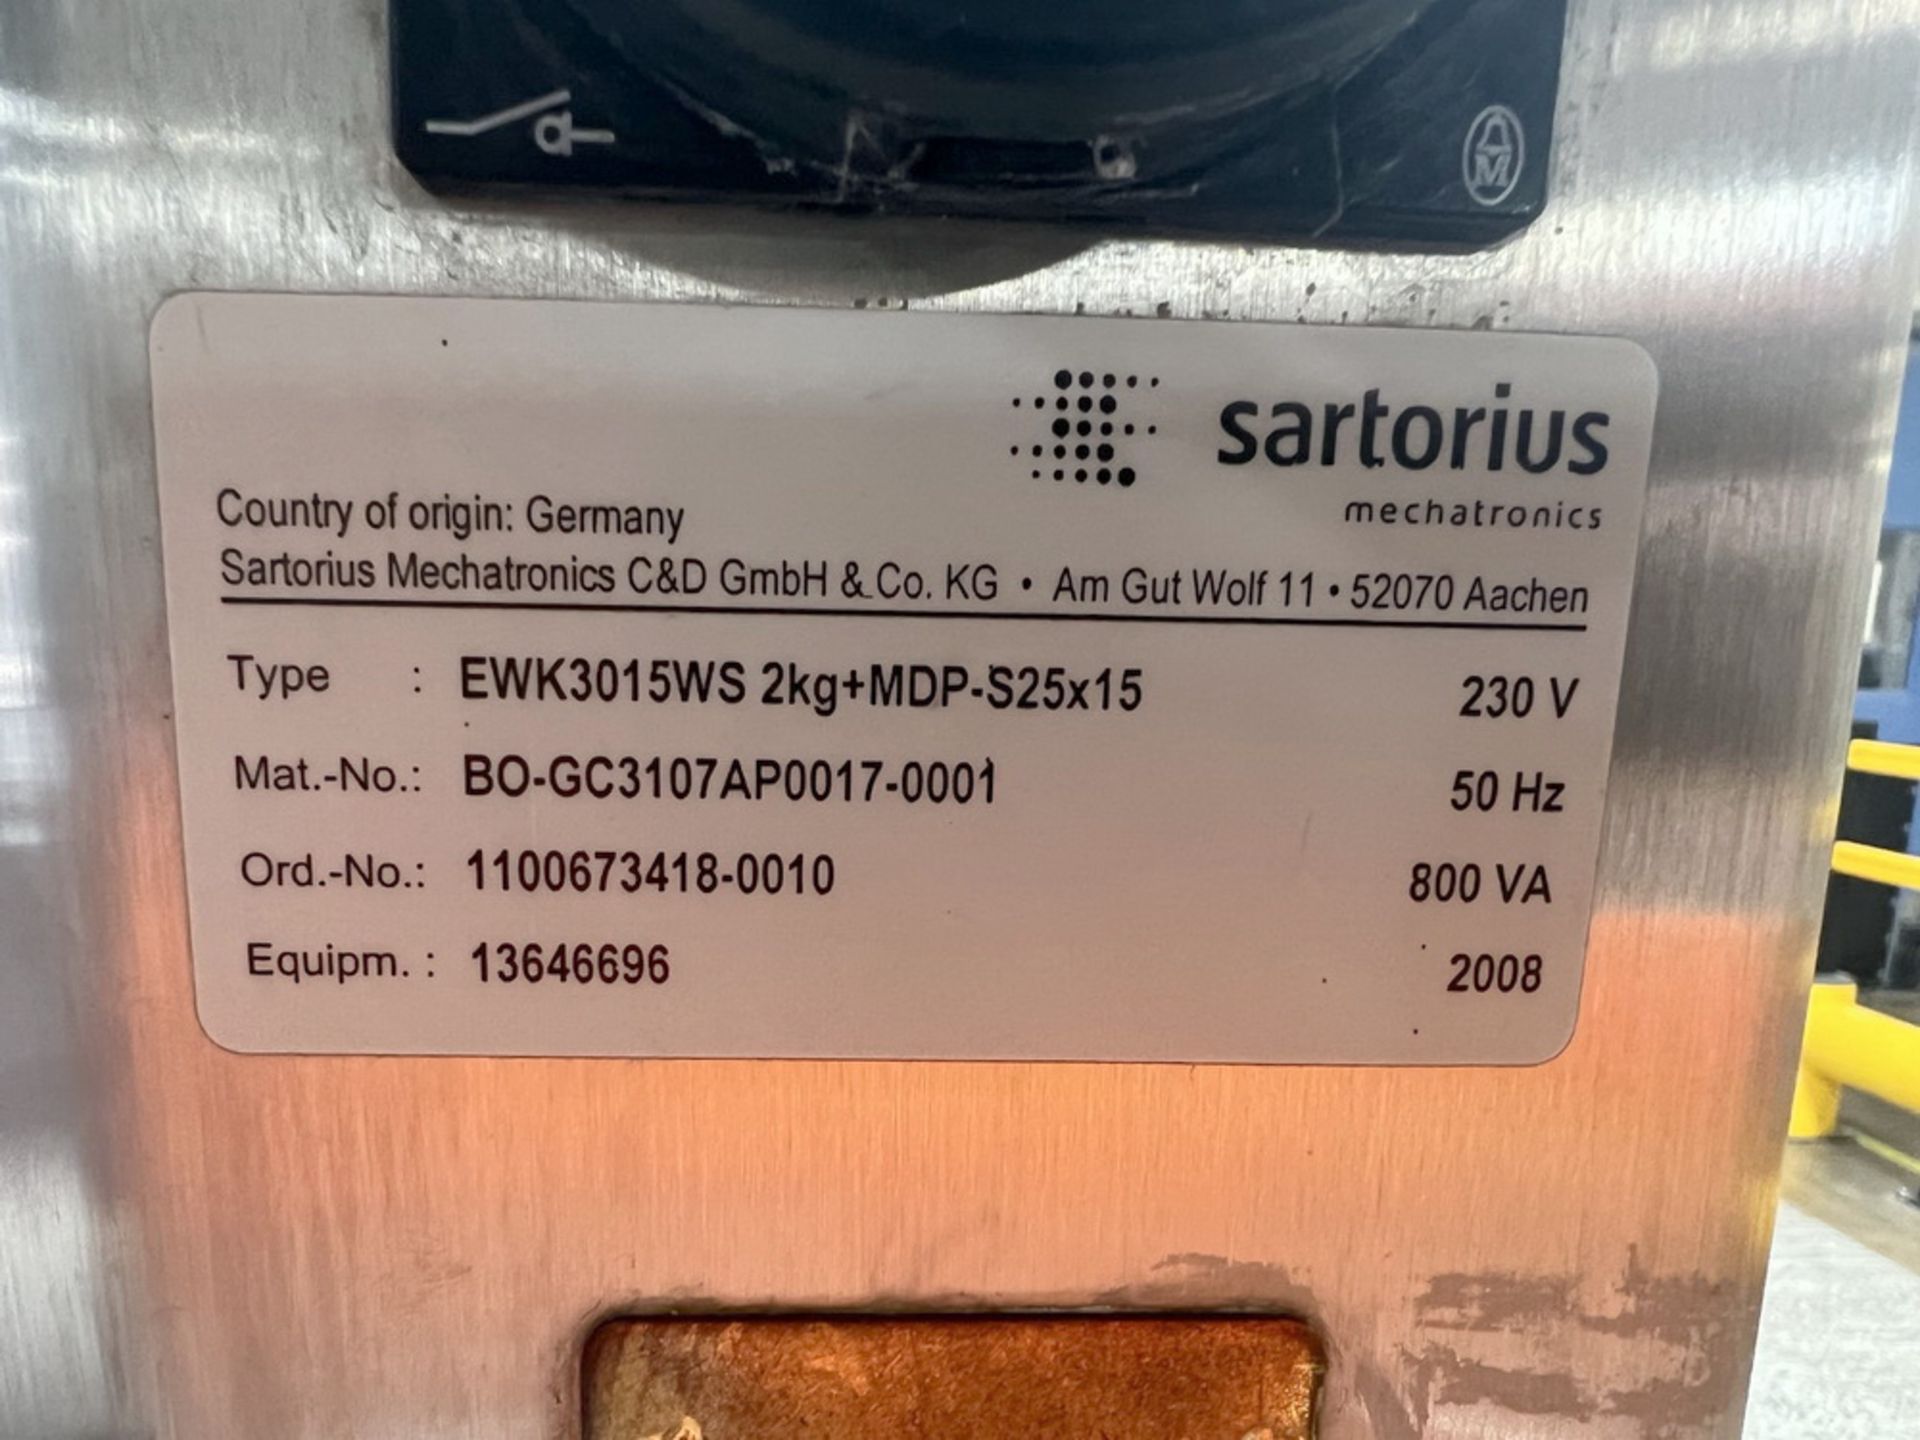 Sartorius Metal Detector and Checkweigher Combo - Image 11 of 12